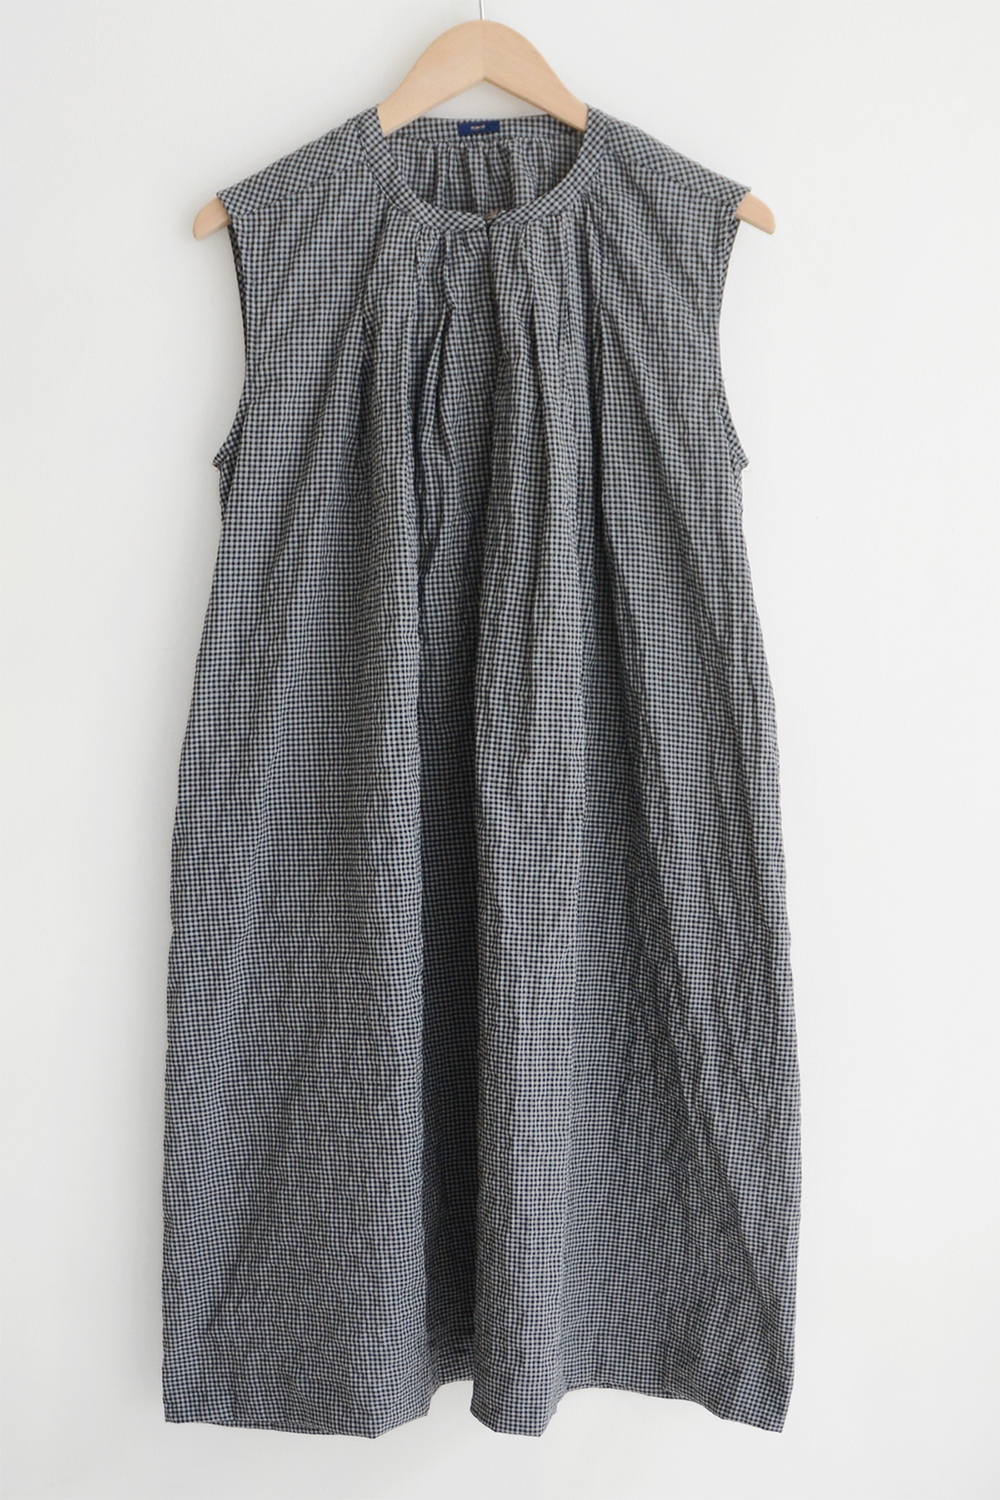 Sleeveless Summer Dress Charcoal Gingham Check Top Picture